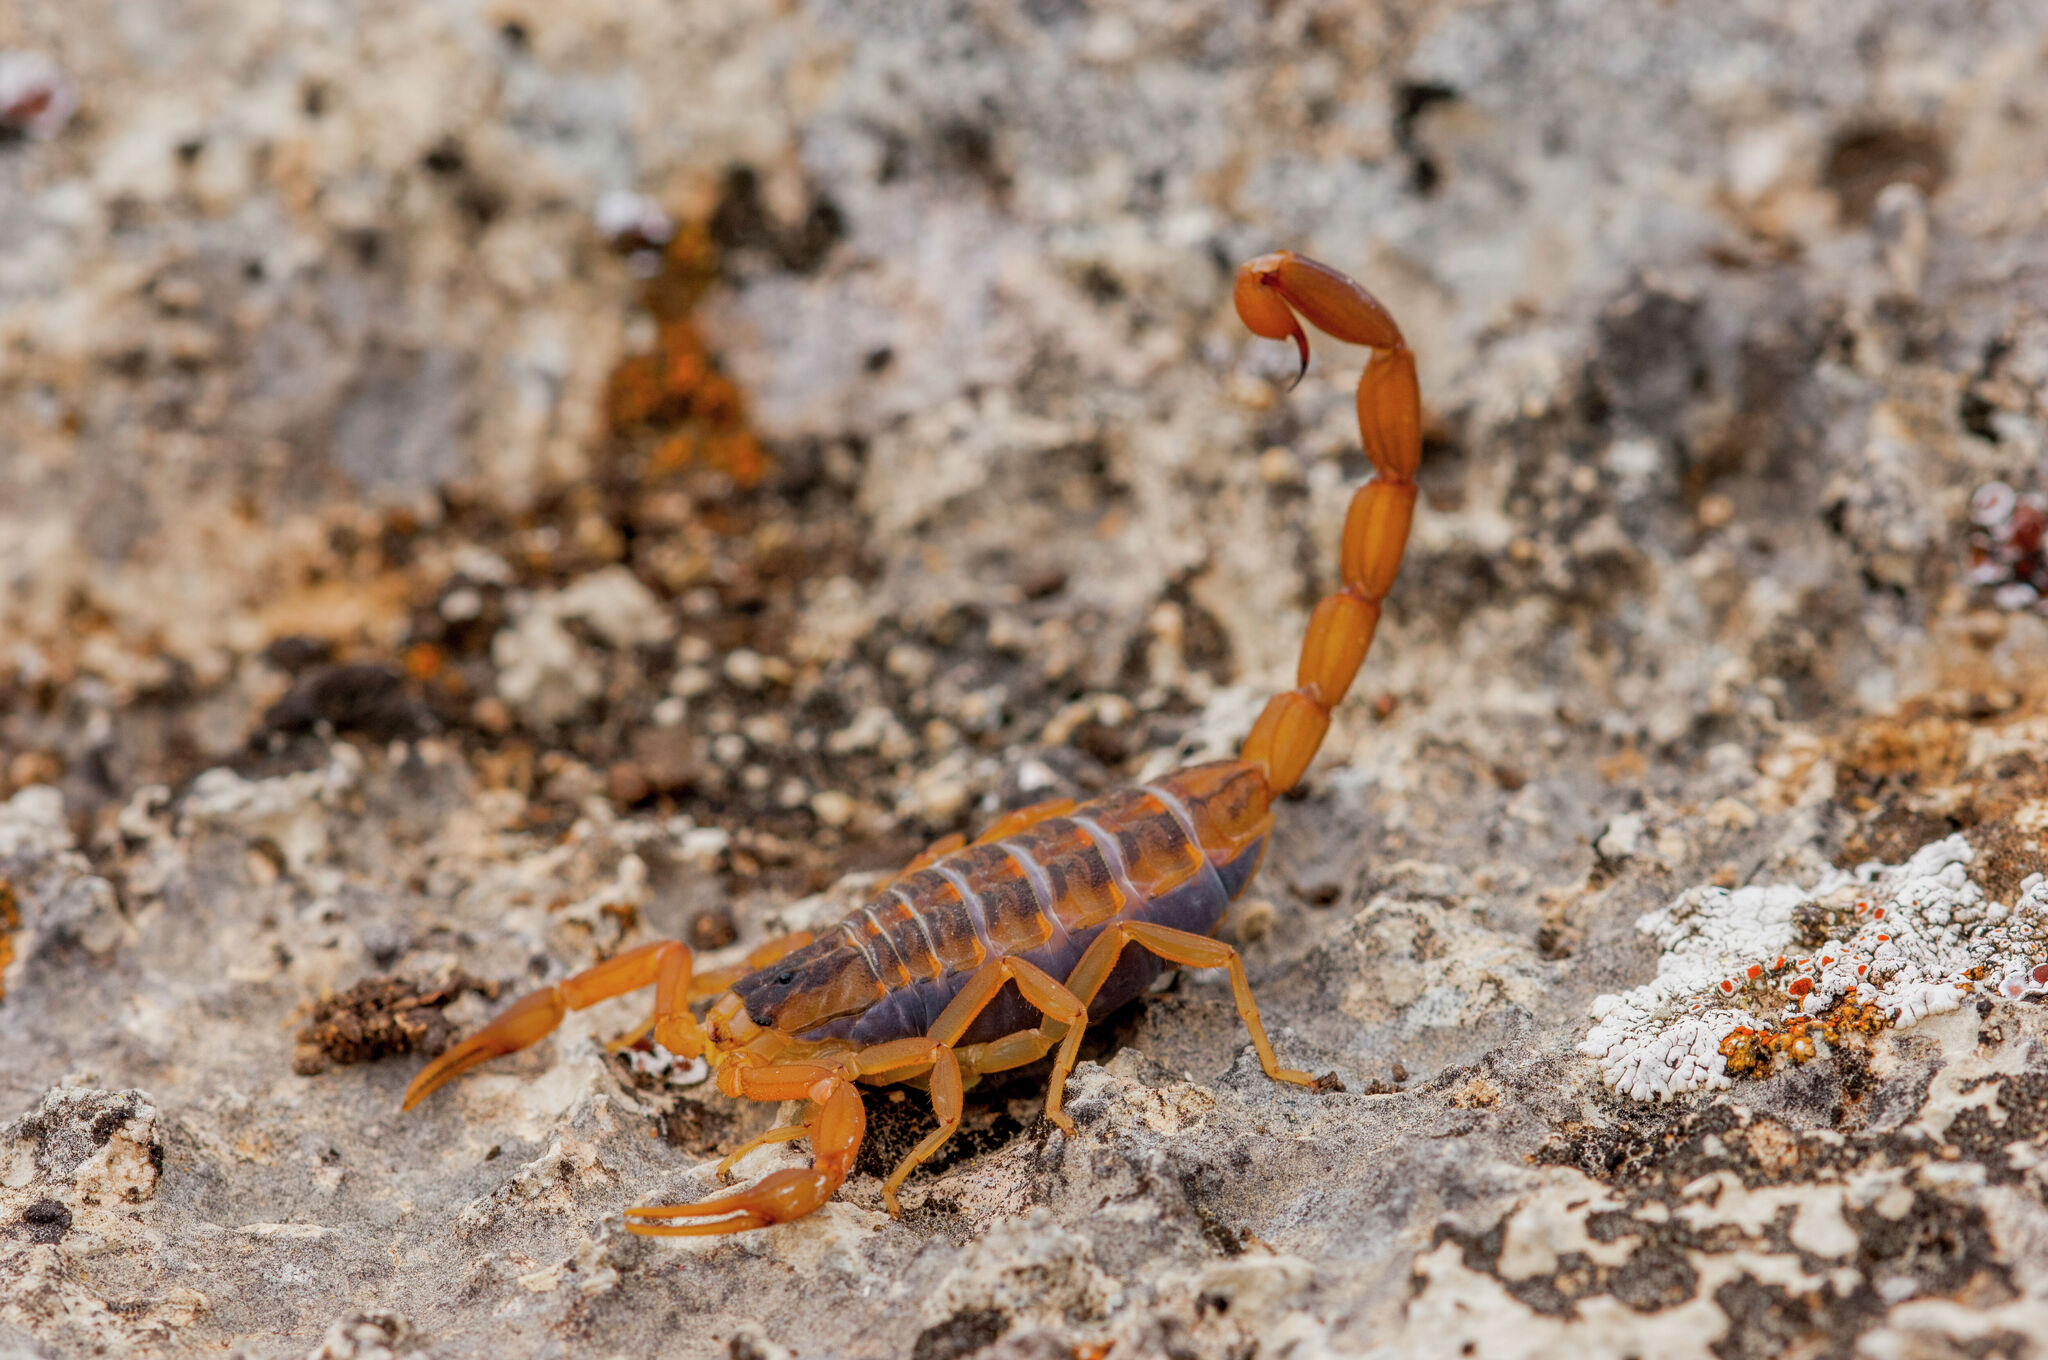 How to treat scorpion stings, avoid these arachnids and more